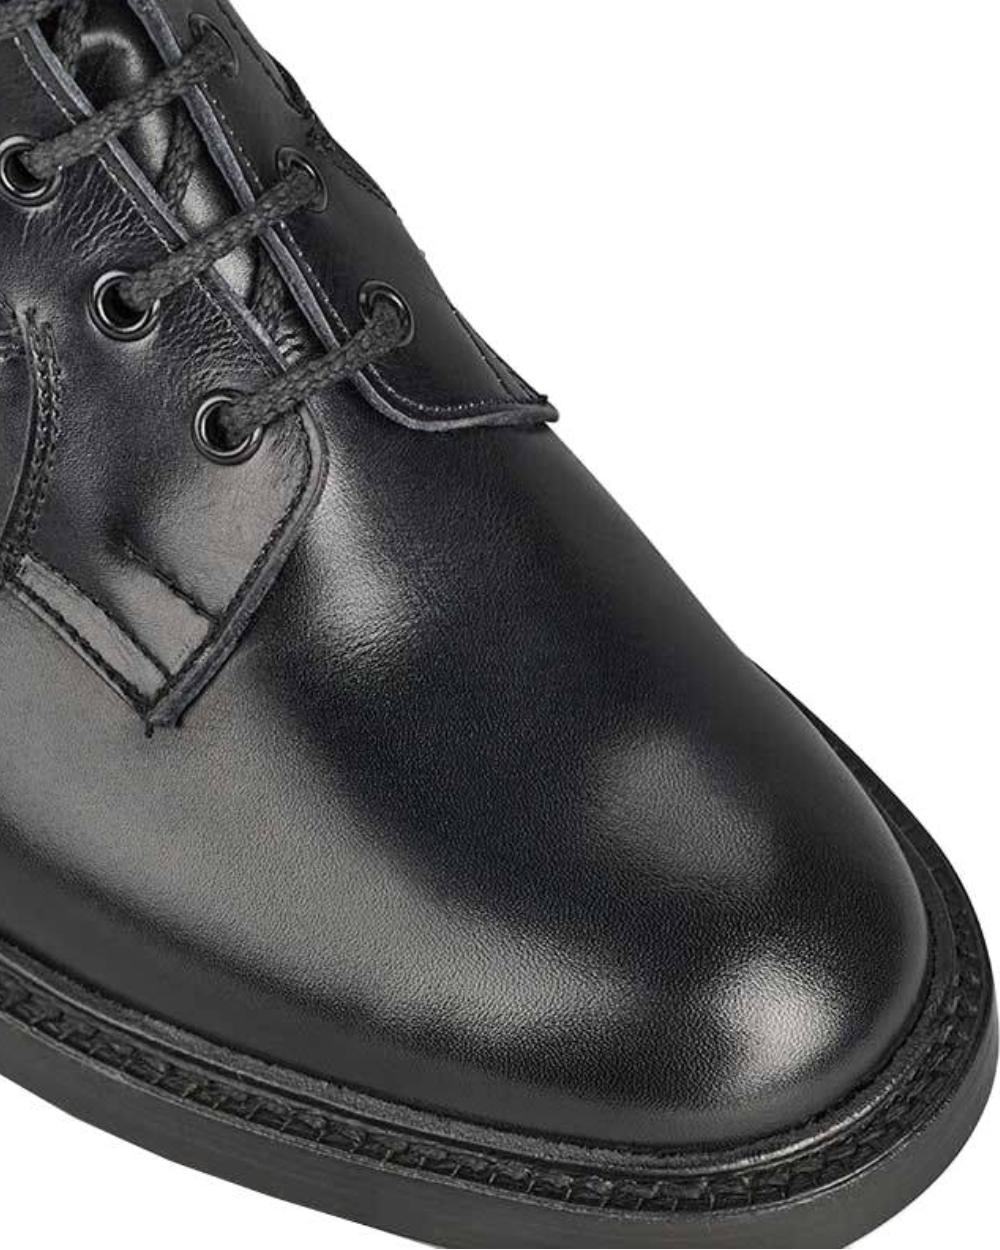 Black Calf Coloured Trickers Burford Leather Sole Country Boot On A White Background 